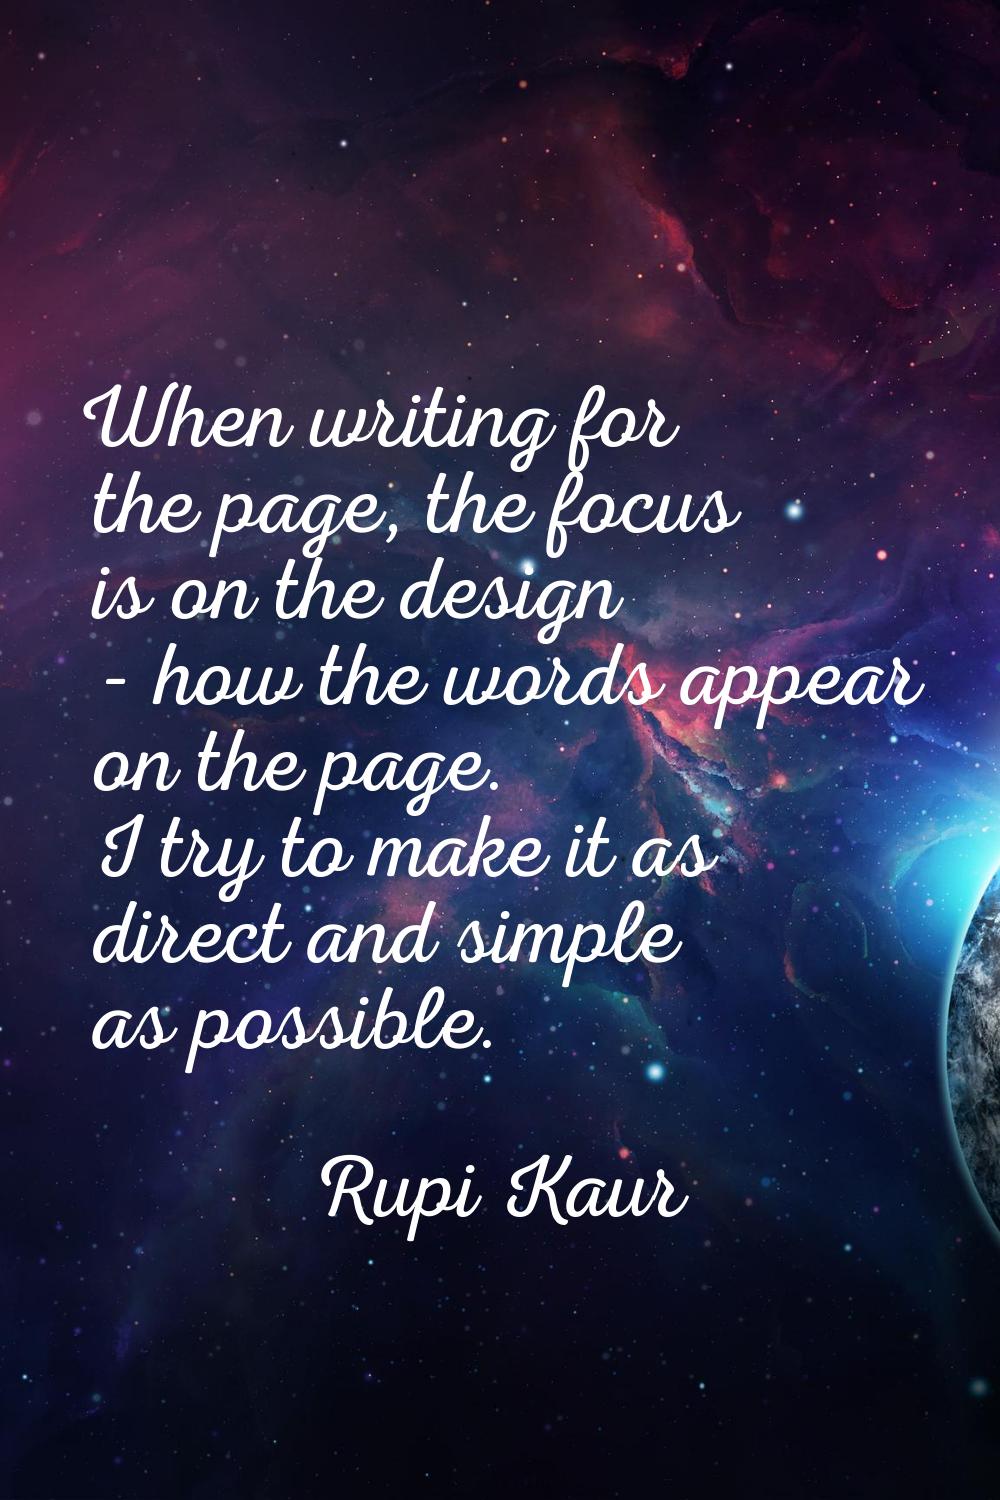 When writing for the page, the focus is on the design - how the words appear on the page. I try to 